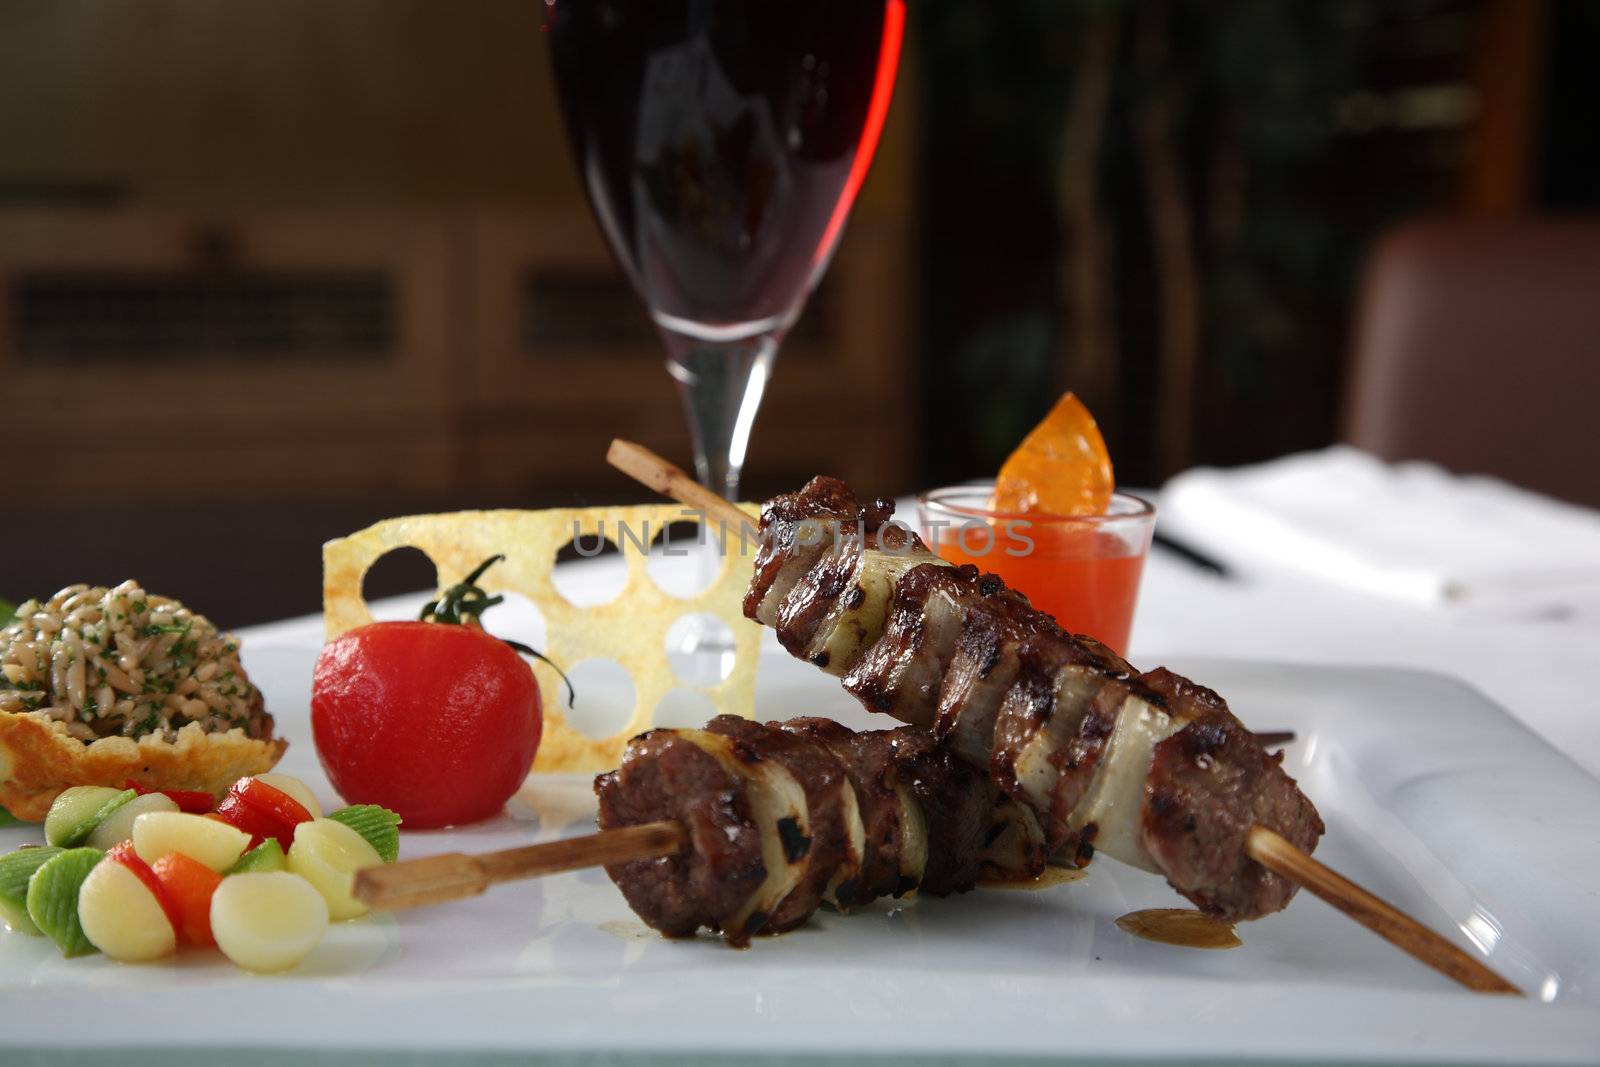 Kebab tomato and red wine by shamtor